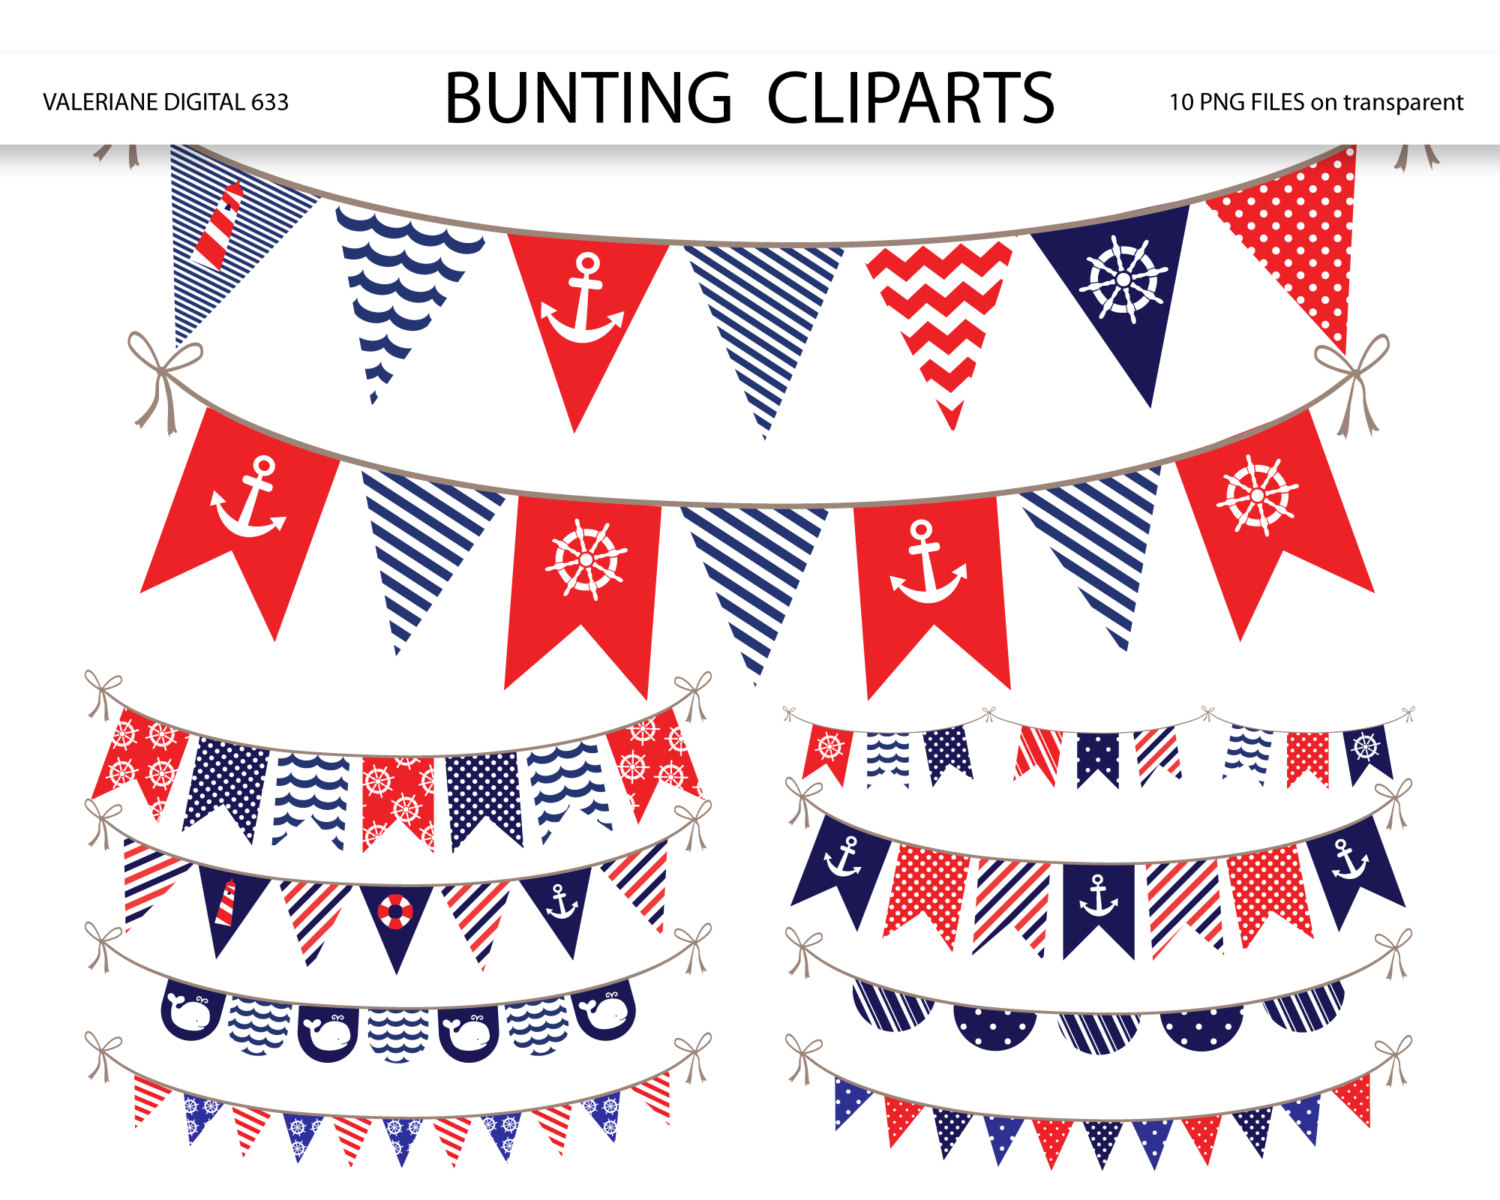 Nautical Bunting banner clipart, nautical clipart, bunting banners clip art pack for invitations, scrapbooking - INSTANT DOWNLOAD Pack 633